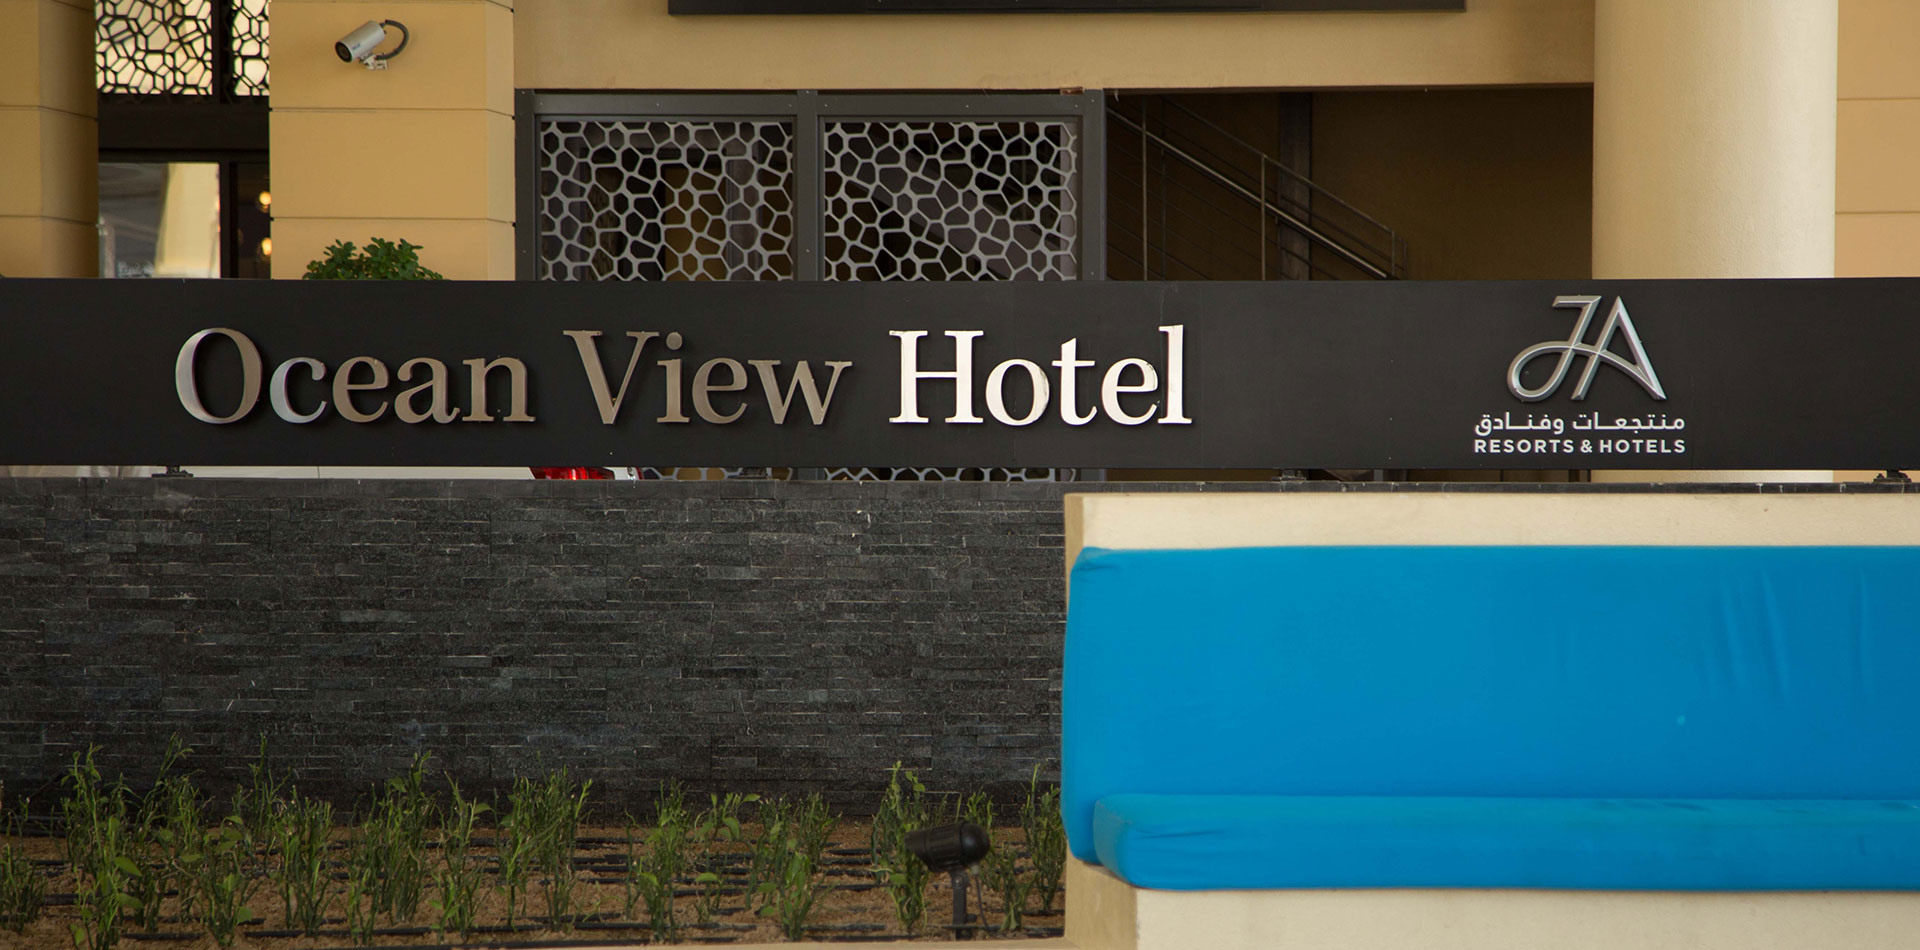 Monument Signage of Ocean View Hotel